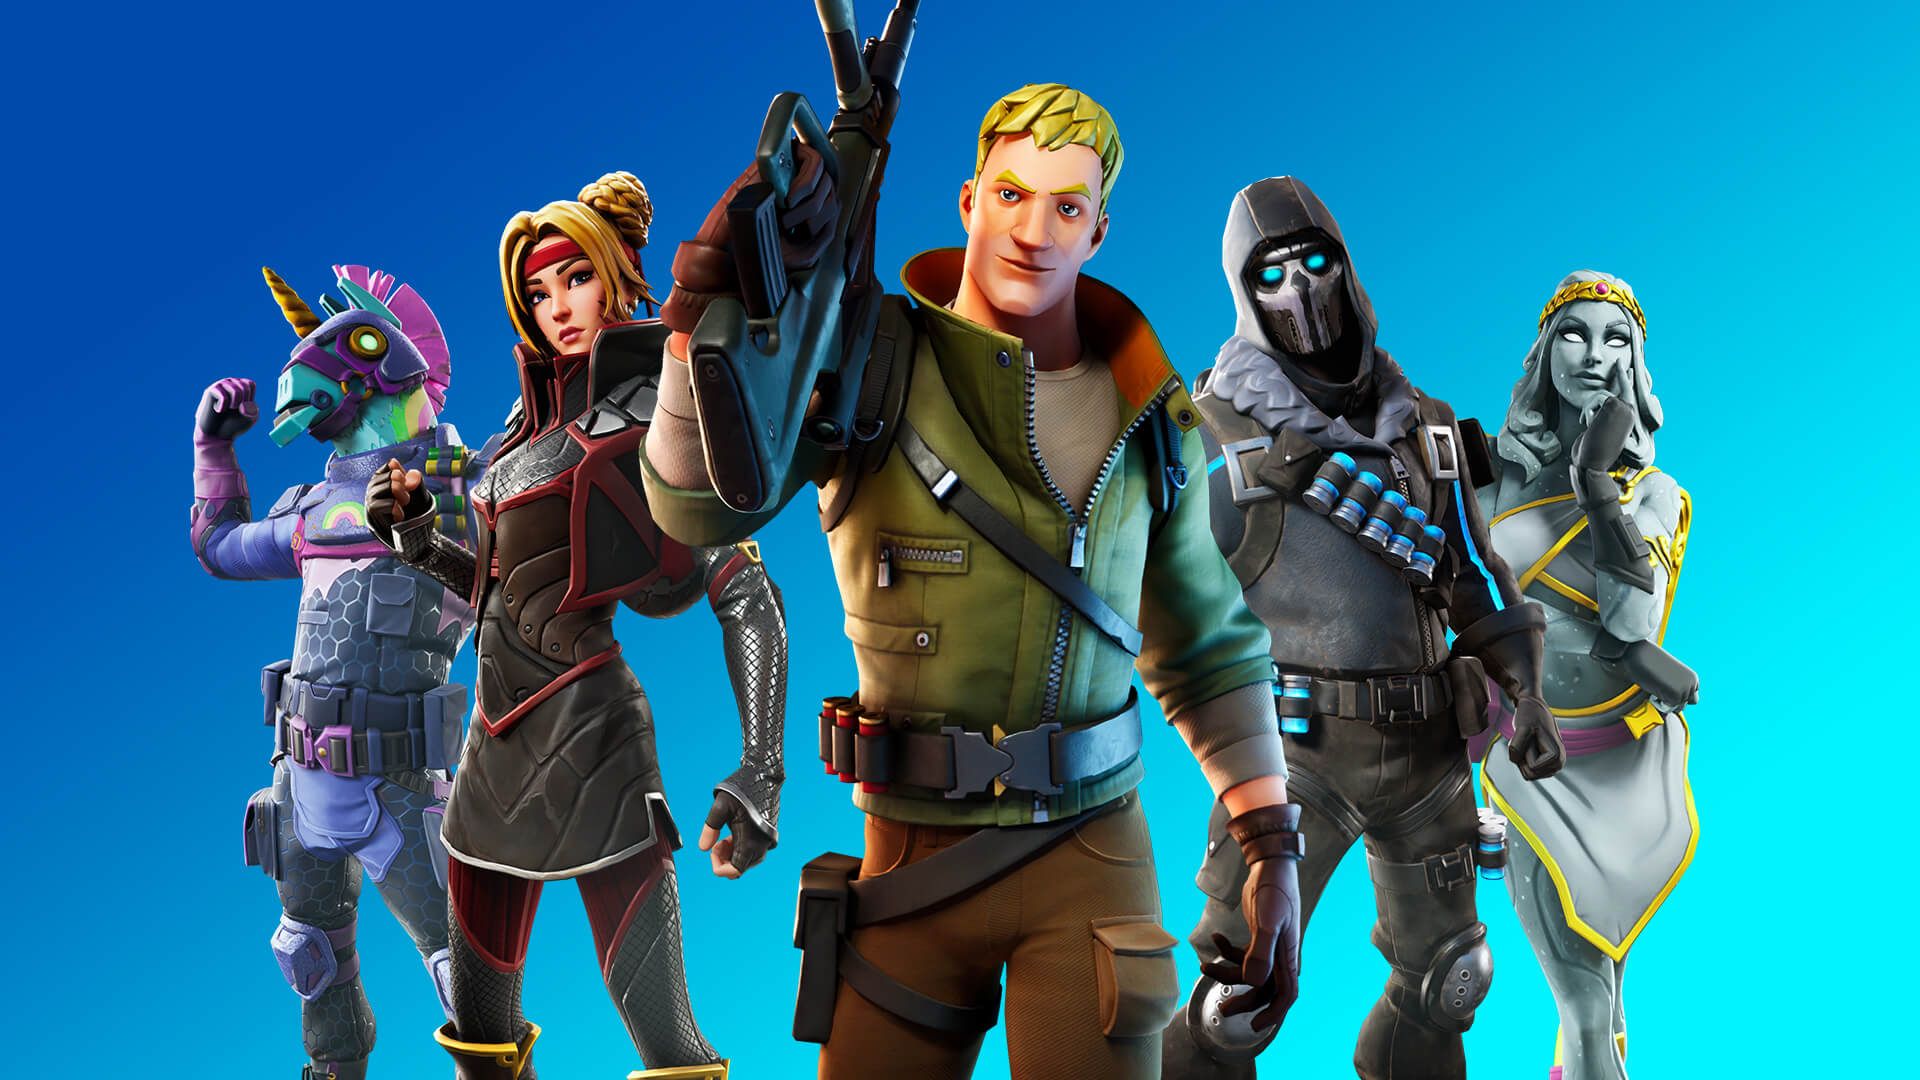 Fortnite Teases Chapter 2 Season 2 Details, Including Upcoming Two-Week Event